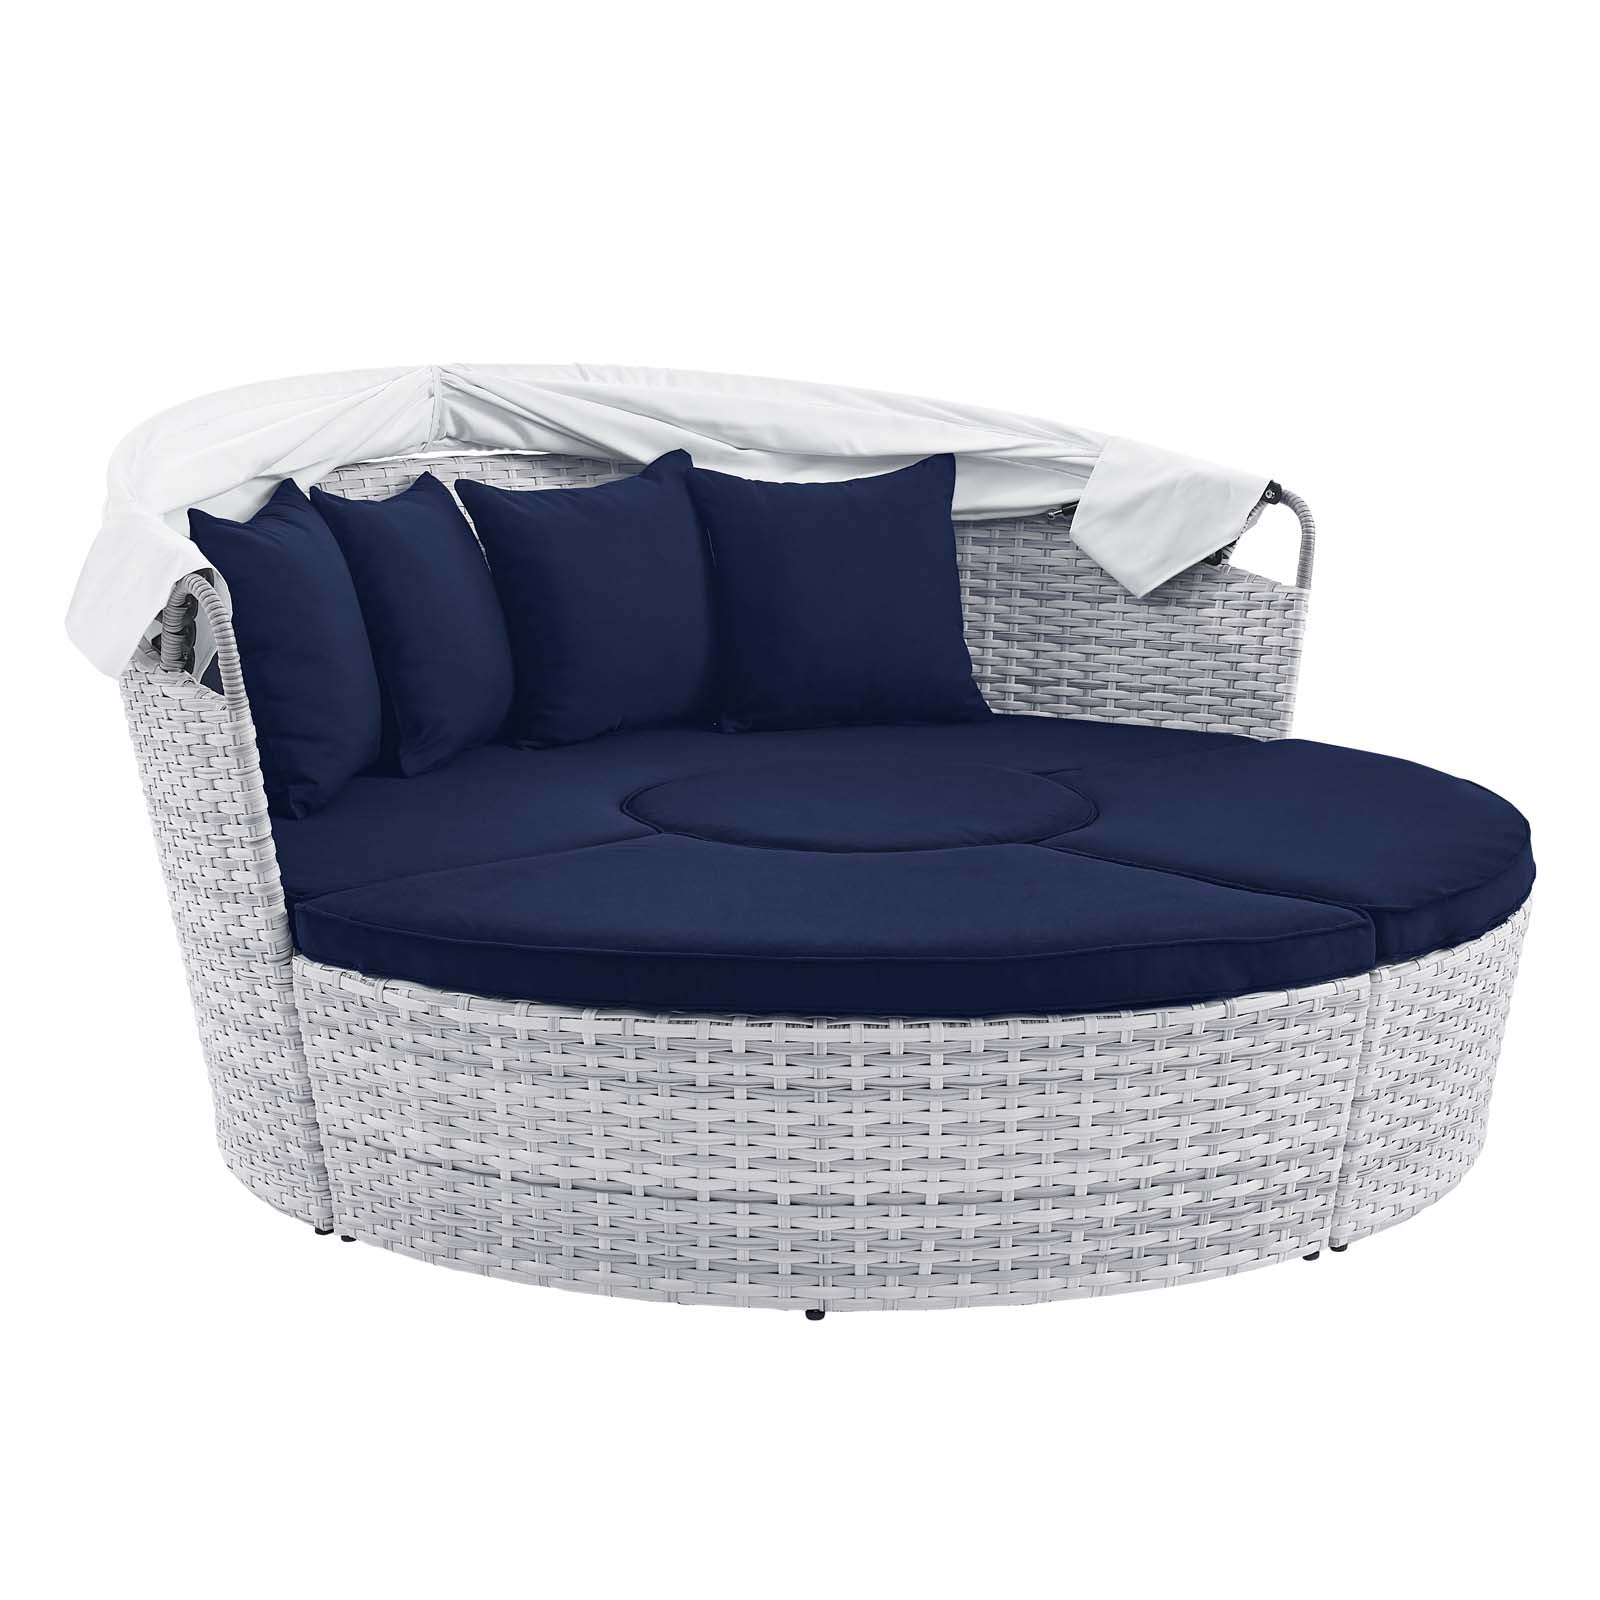 Modway Outdoor Conversation Sets - Scottsdale-Canopy-Sunbrella¨-Outdoor-Patio-Daybed-Light-Gray-Navy